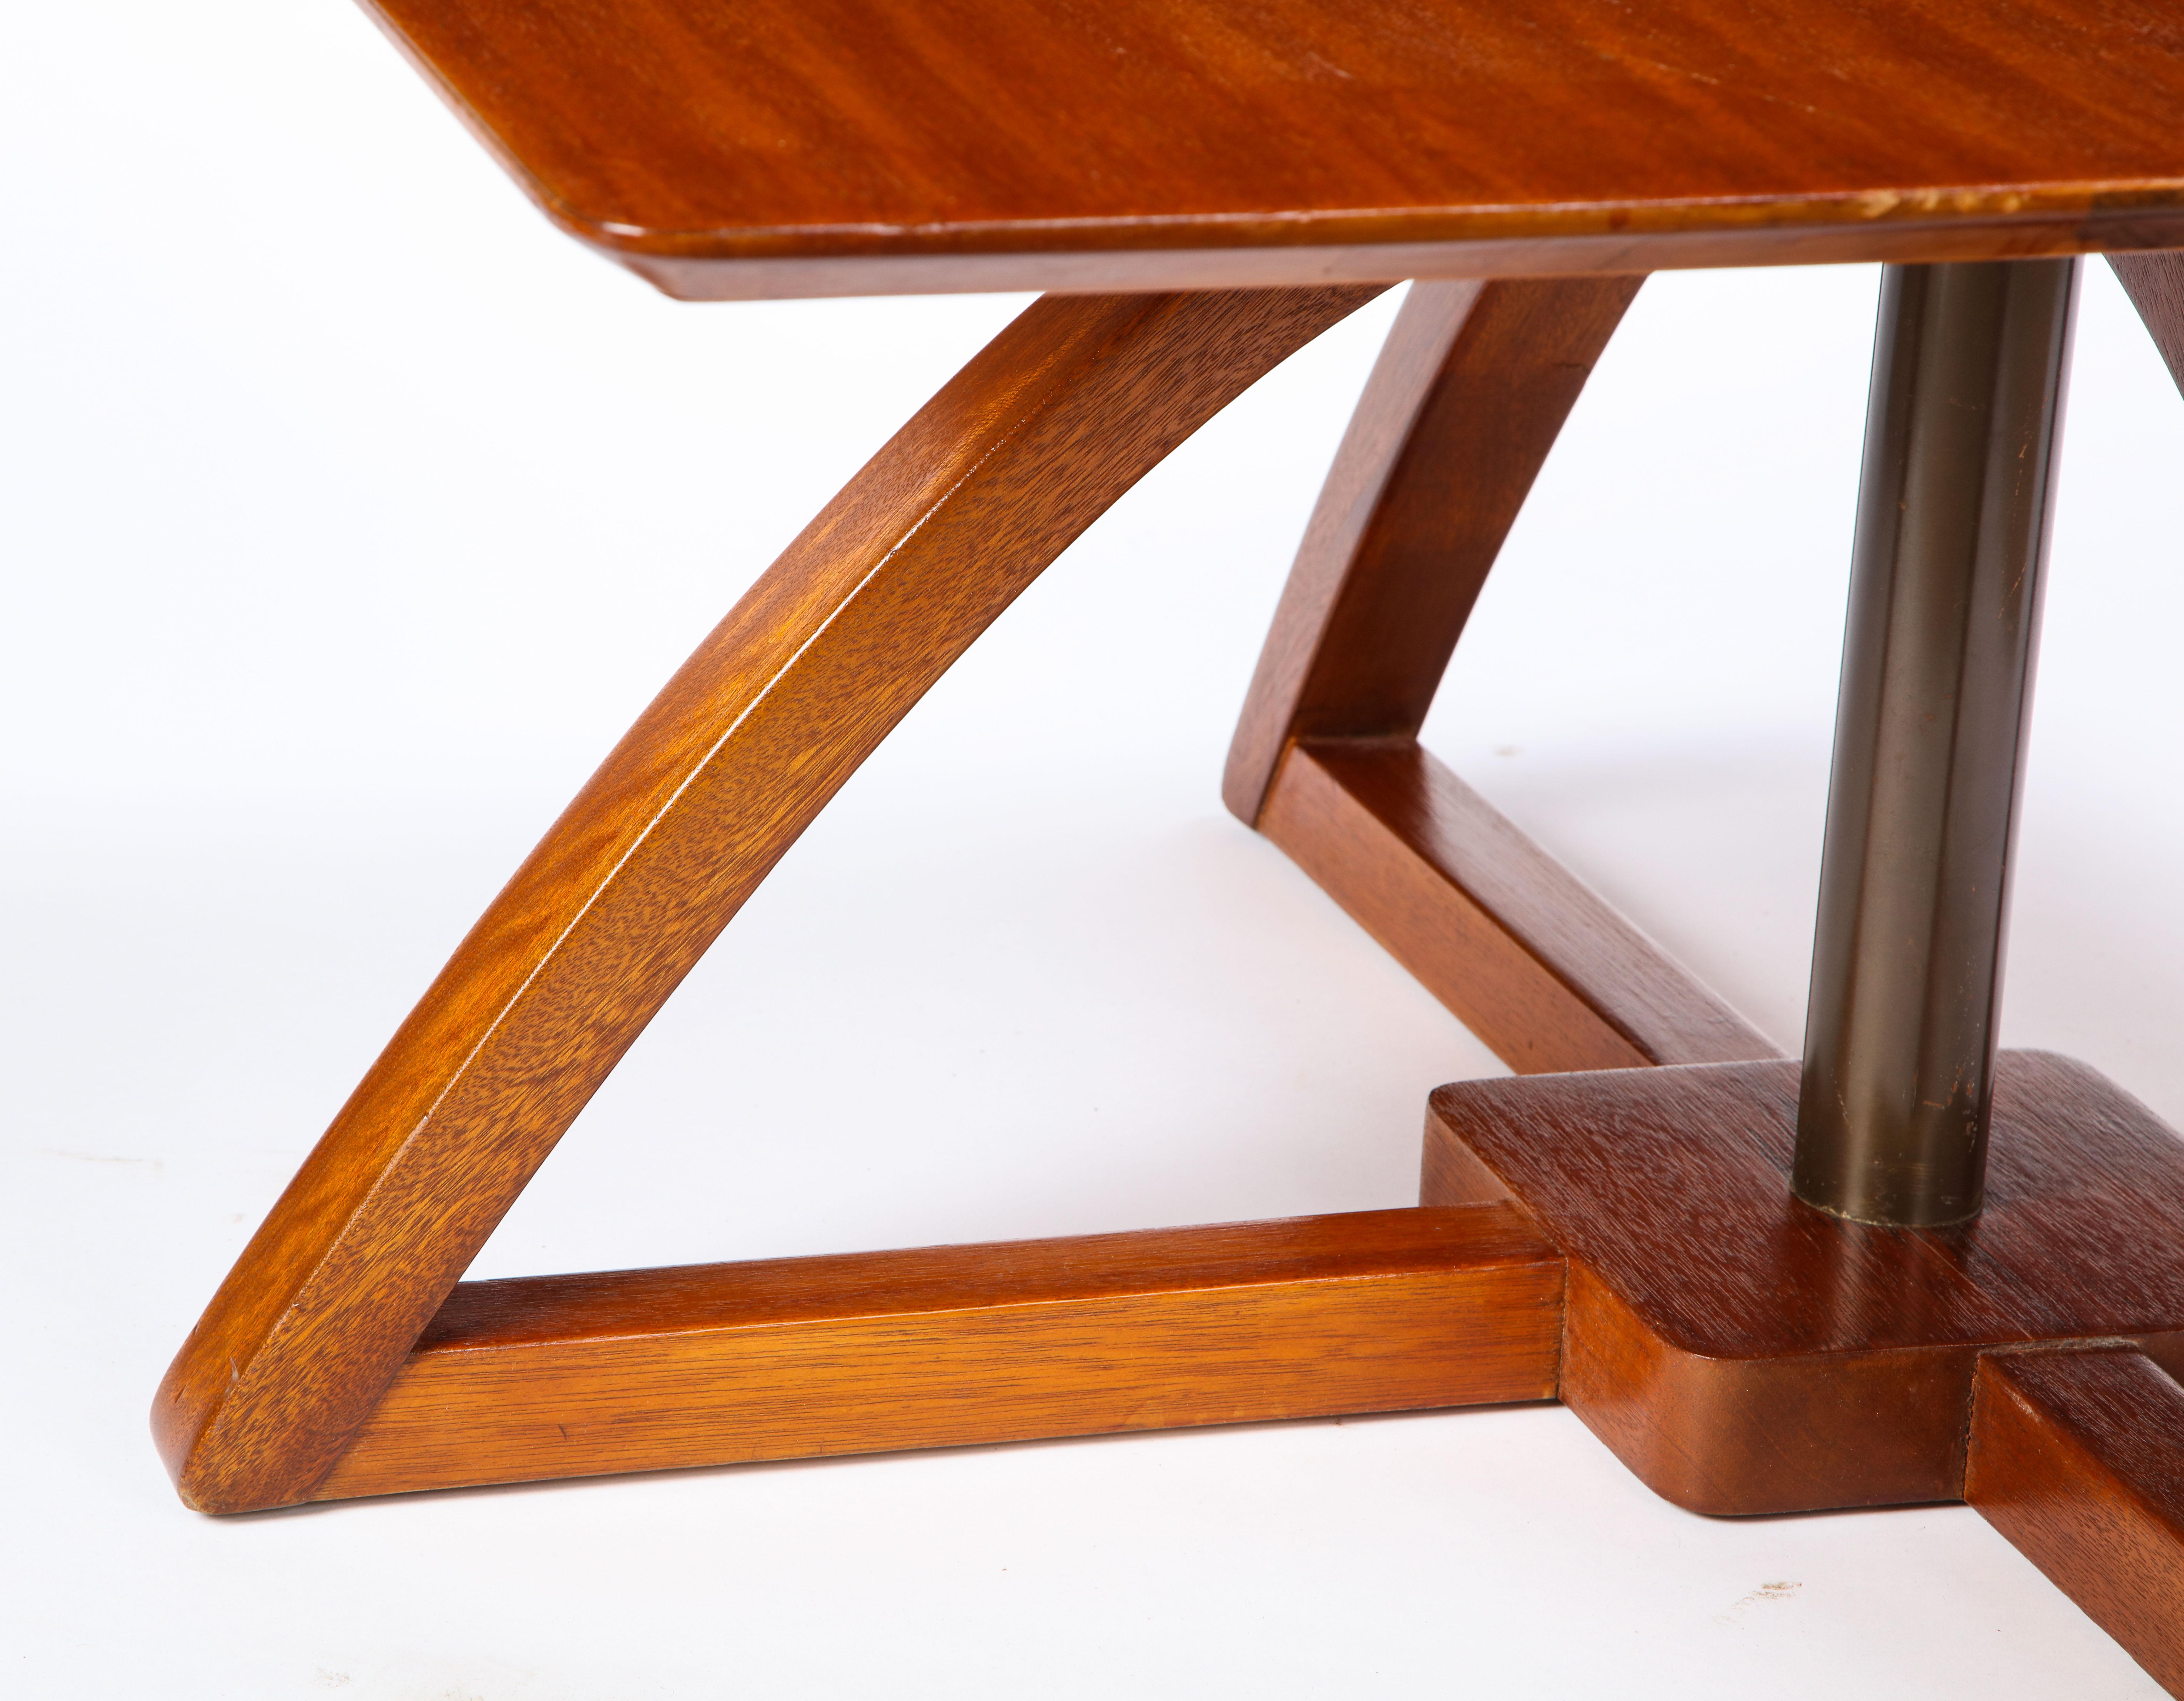 A modern mahogany low table with the ability to be adjustable in height. Its square form and large legs make it a stabile piece, which can be used as a low dining table but most typically a lowboy table. This table was custom made in South Africa.